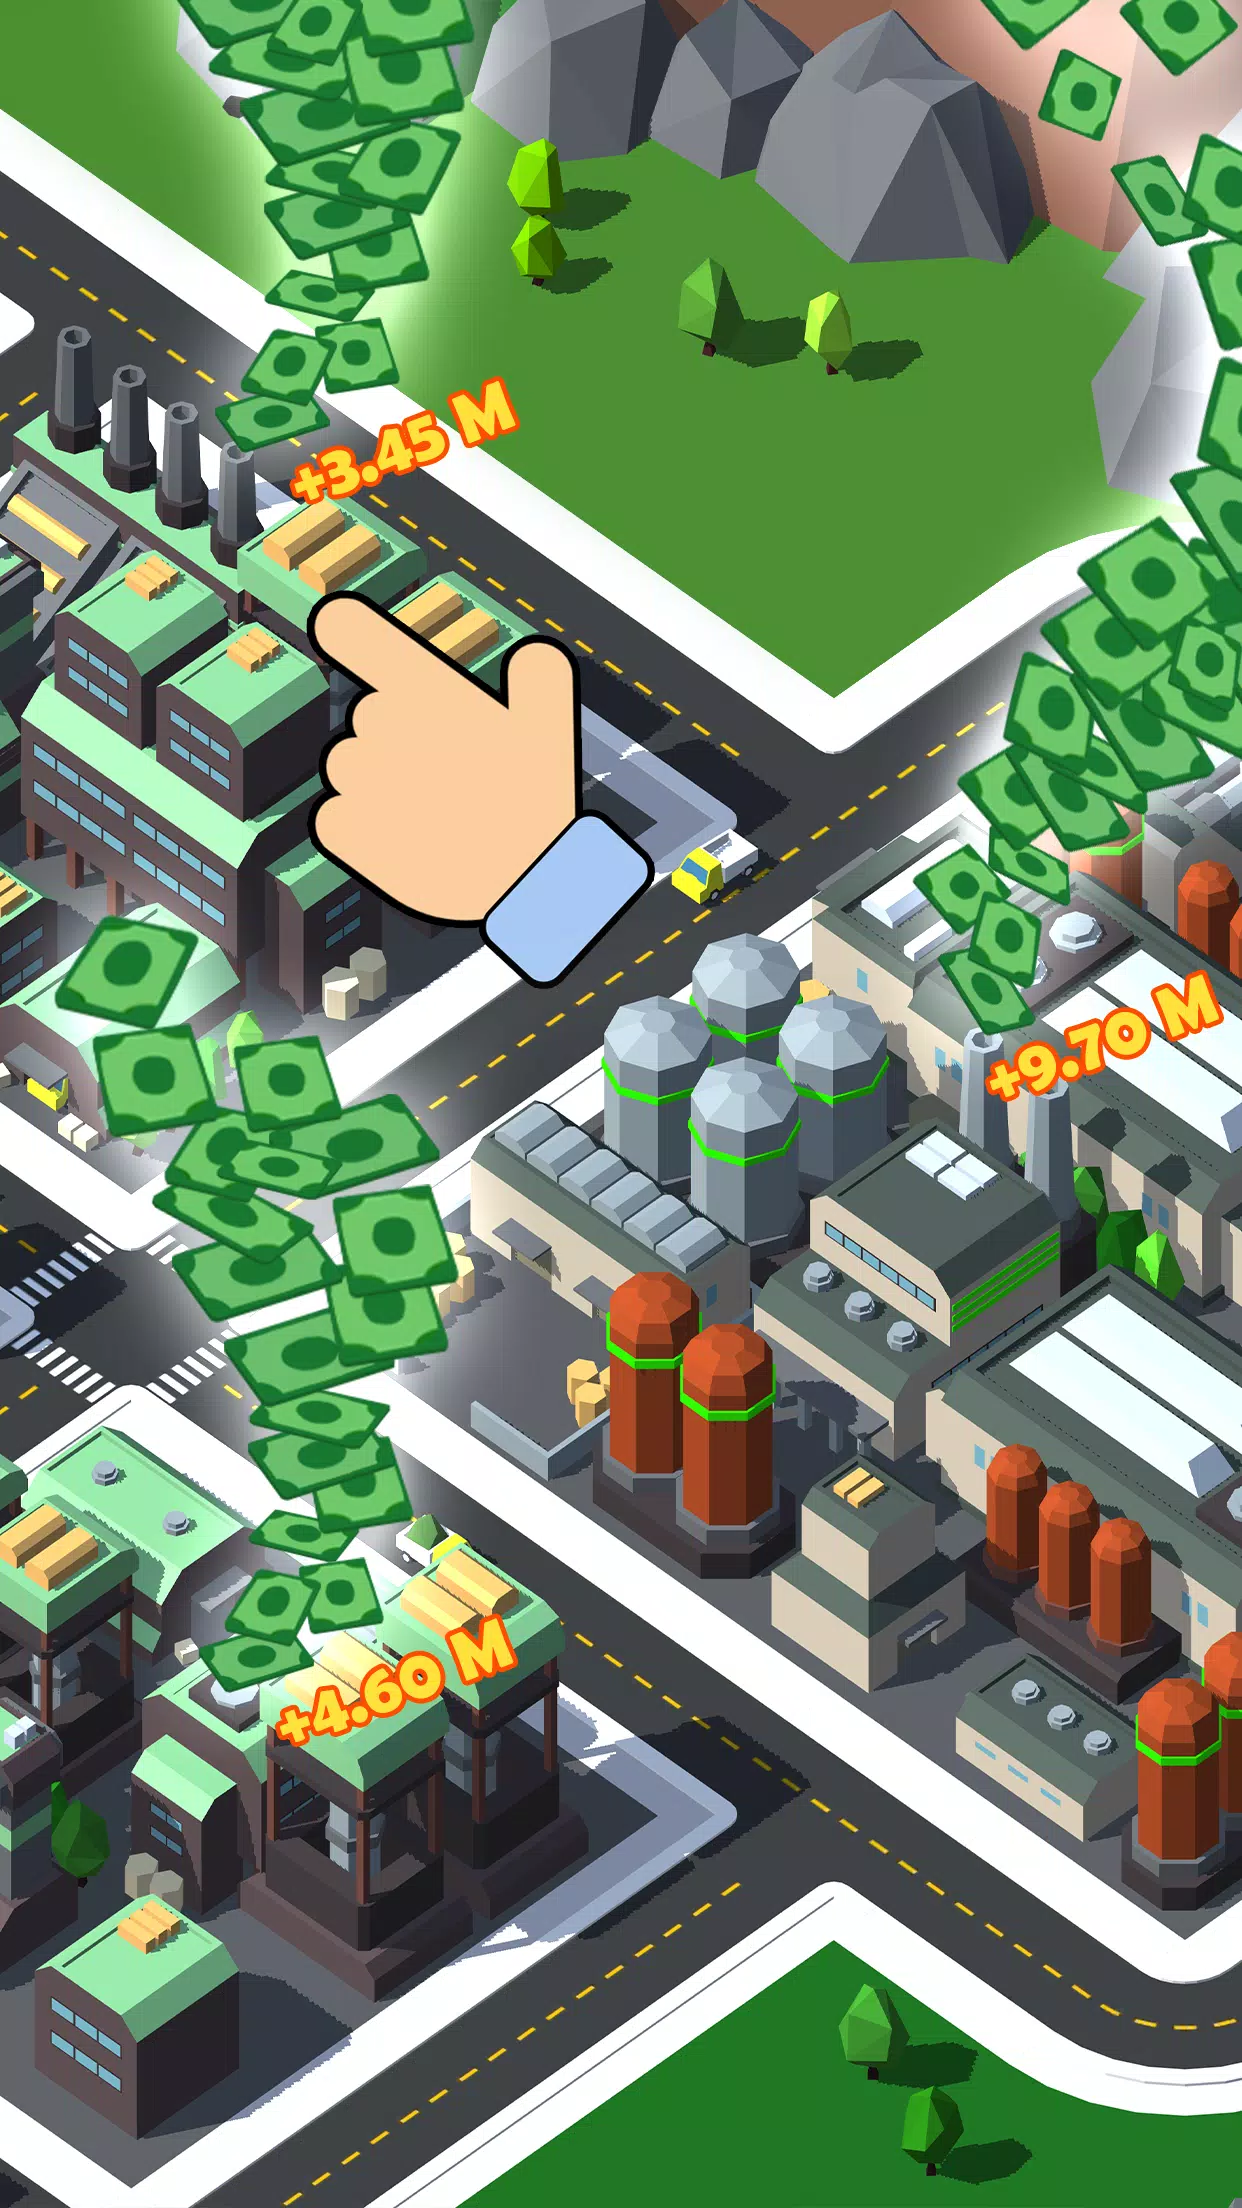 Idle Mining Town: Tycoon Games for Android - Free App Download